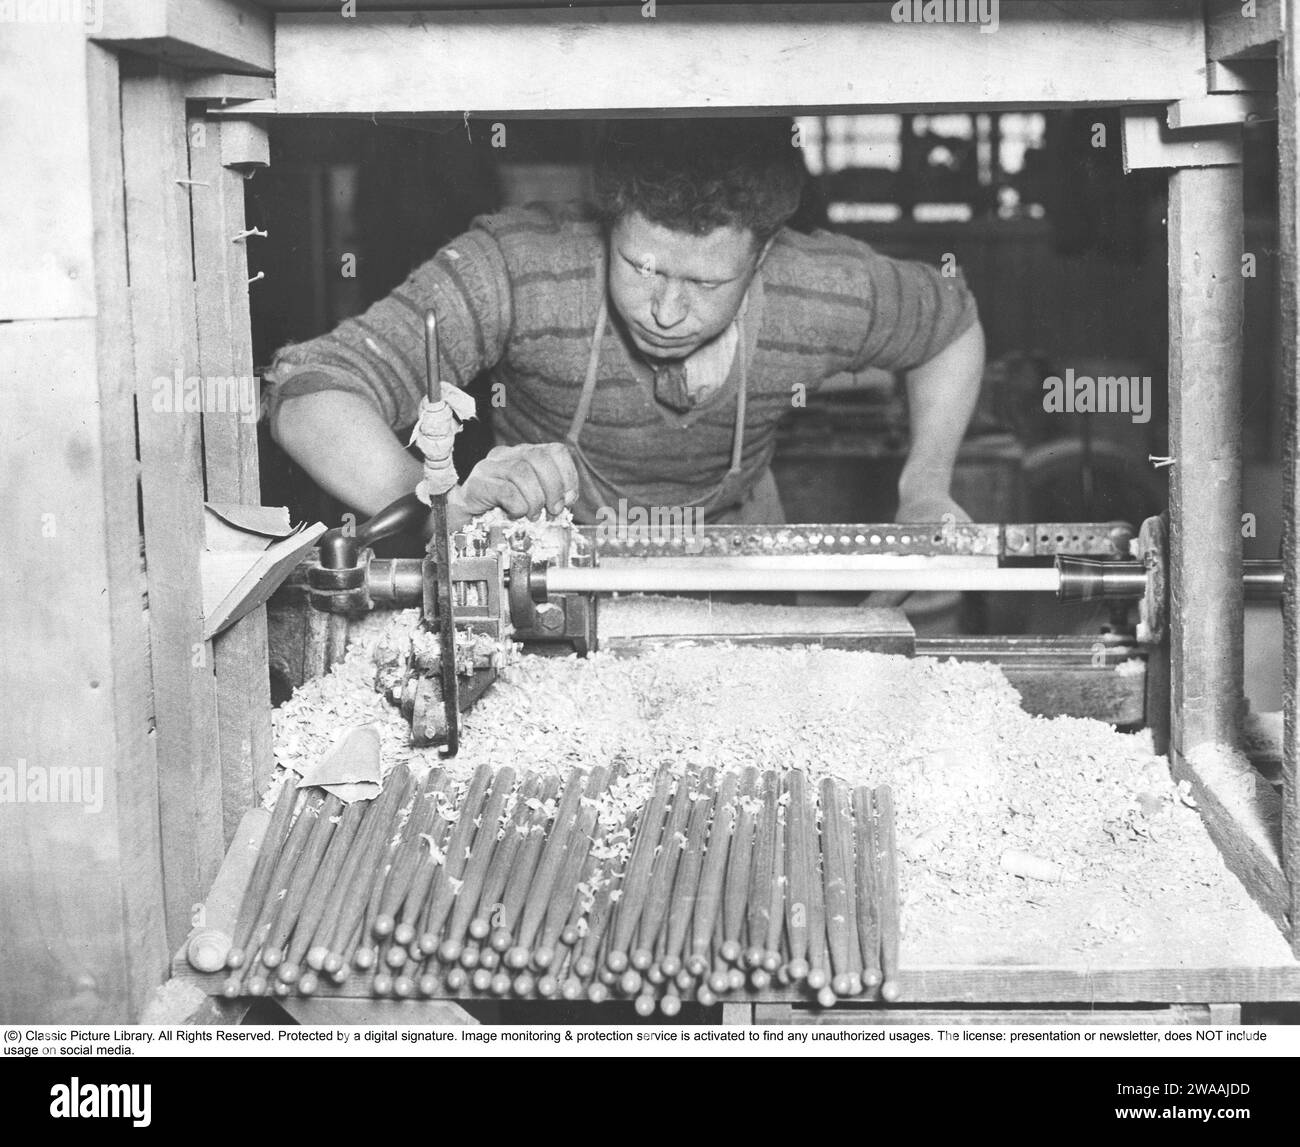 An event in 1933. A turner at his lathe finishing new drumsticks for the British Army Band. The drumsticks are made of Hickory, which is a type of wood with the right properties for the purpose. This is the first time since 1859 that drumsticks of this type of wood have been used in the British Army. 21 February 1933 Stock Photo